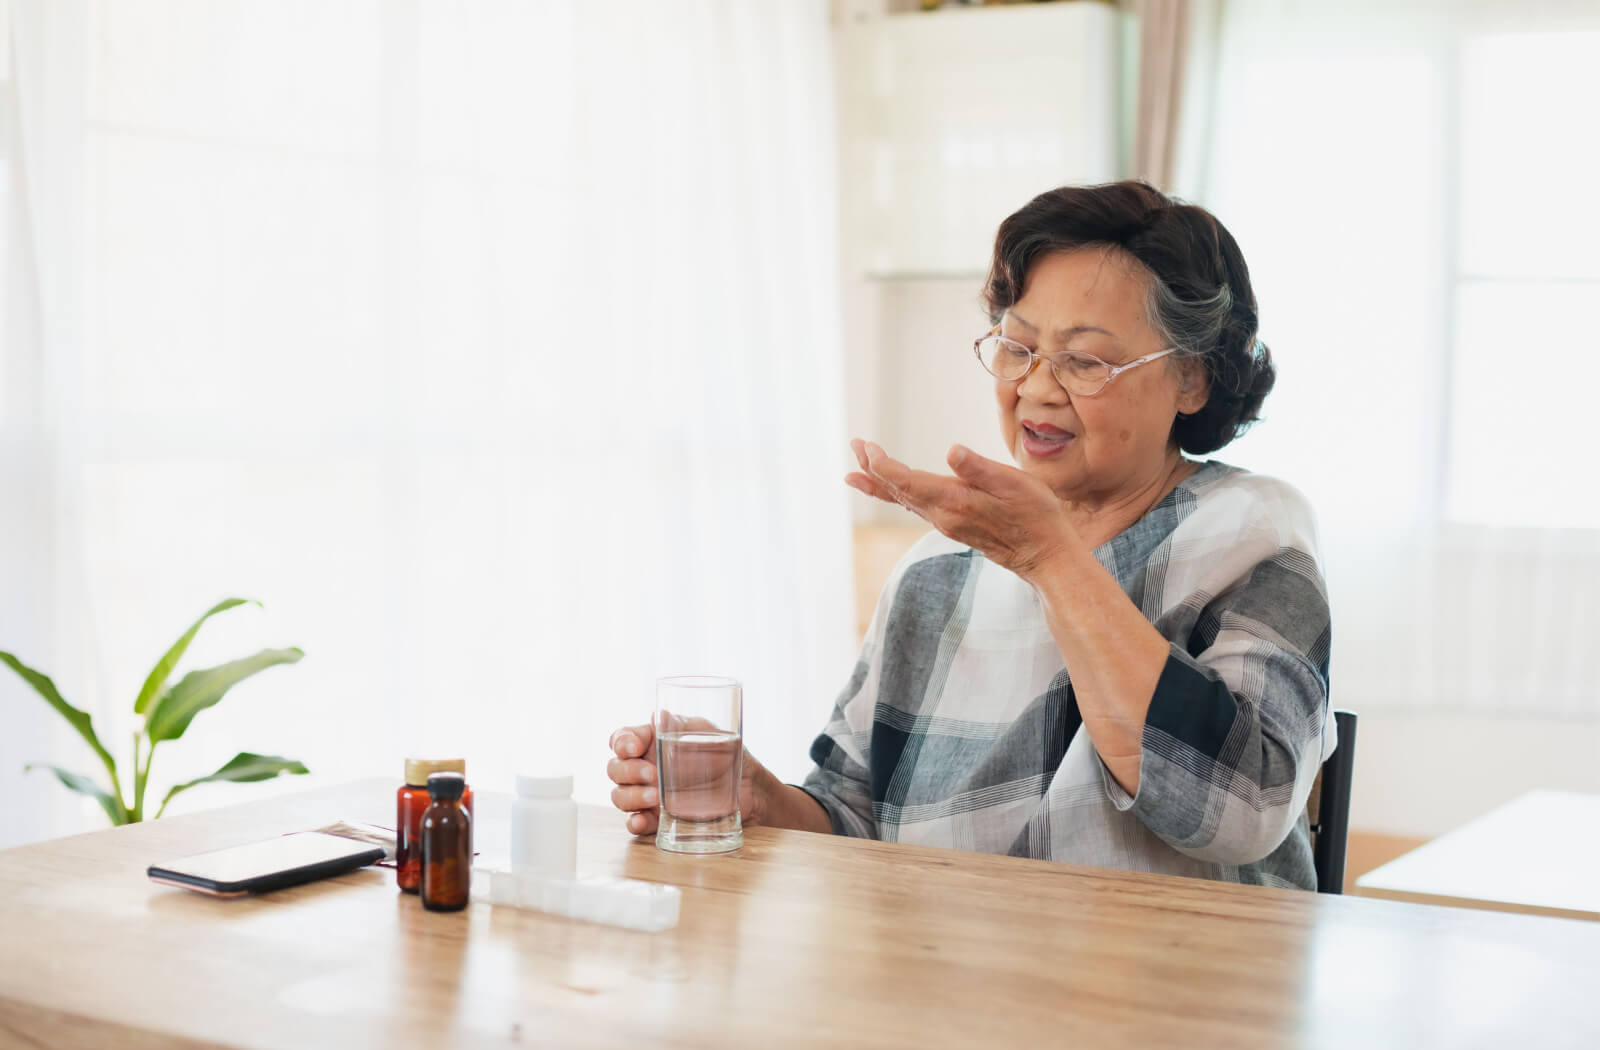 a senior woman with parkinsons sits at a kitchen table, taking medication while holding a water glass